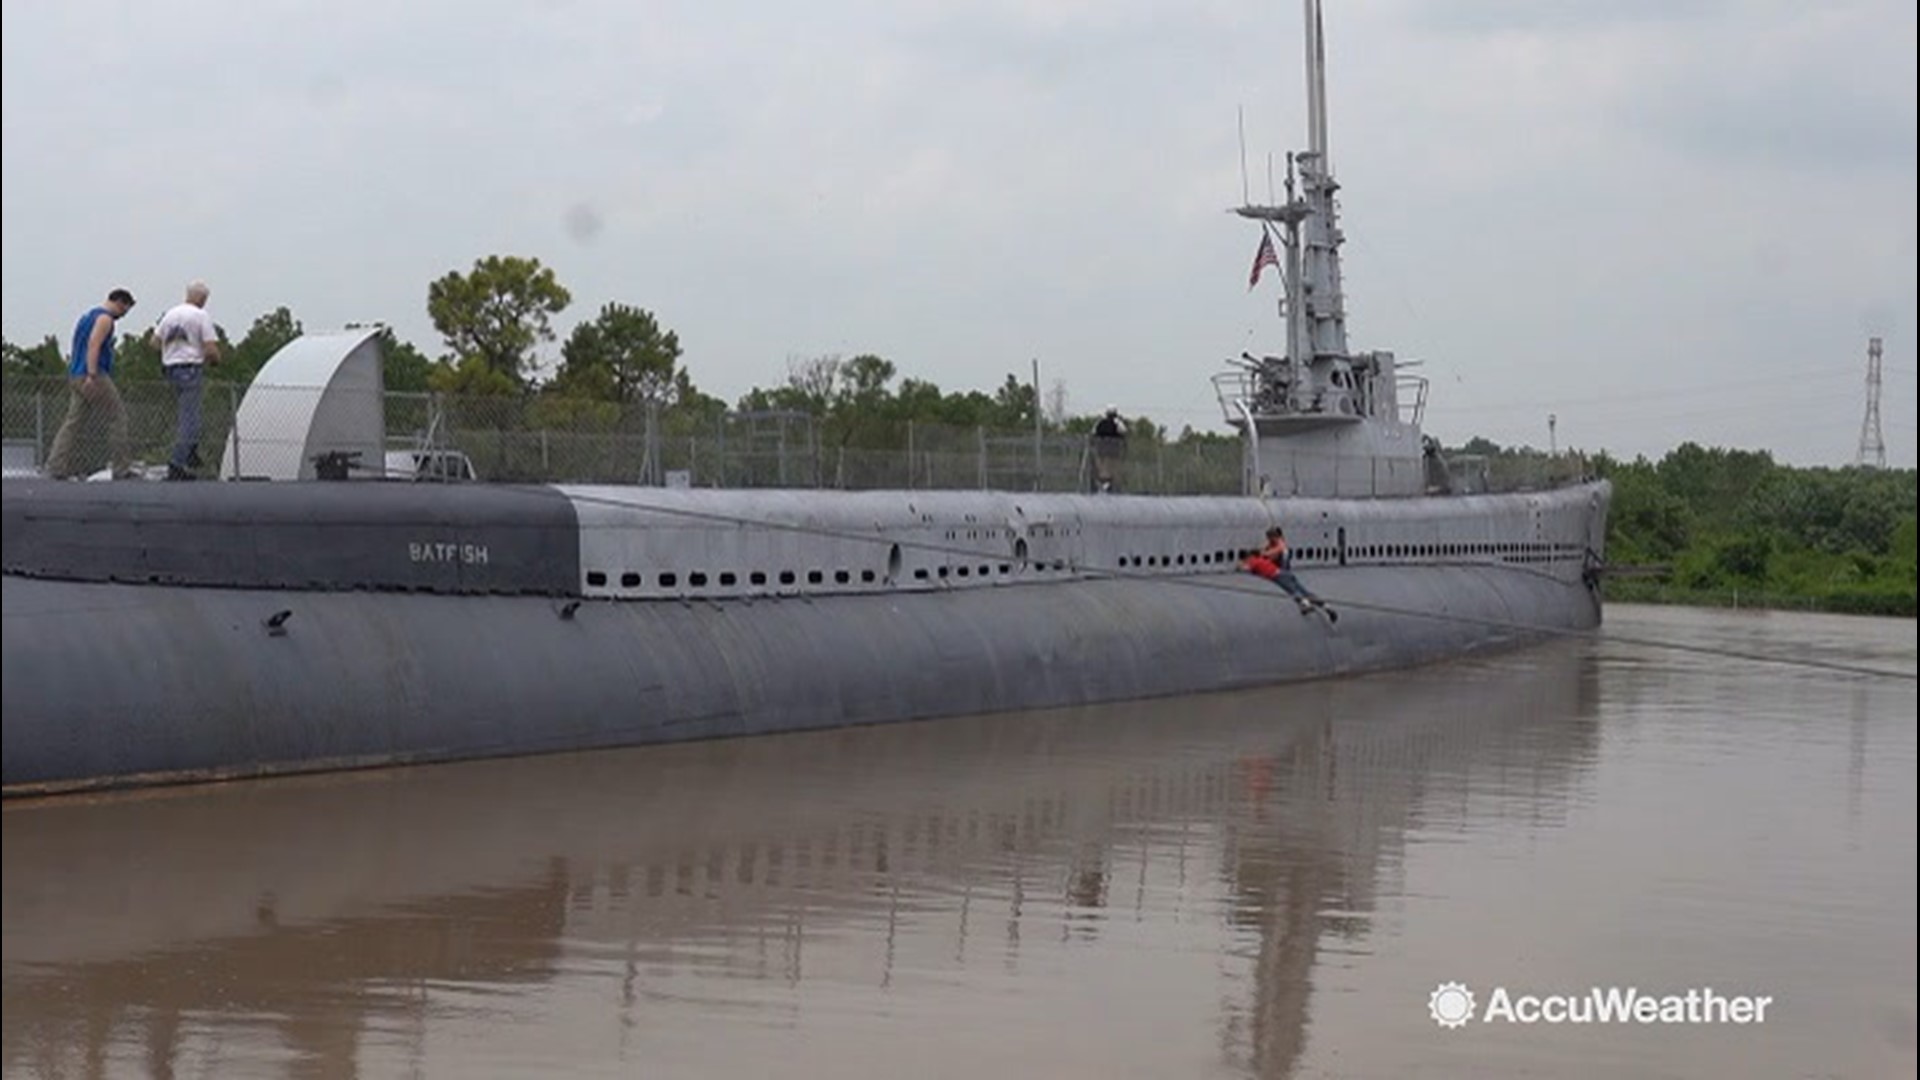 The USS Batfish survived seven war patrols during WWII but it might not survive its latest battle with Mother Nature.